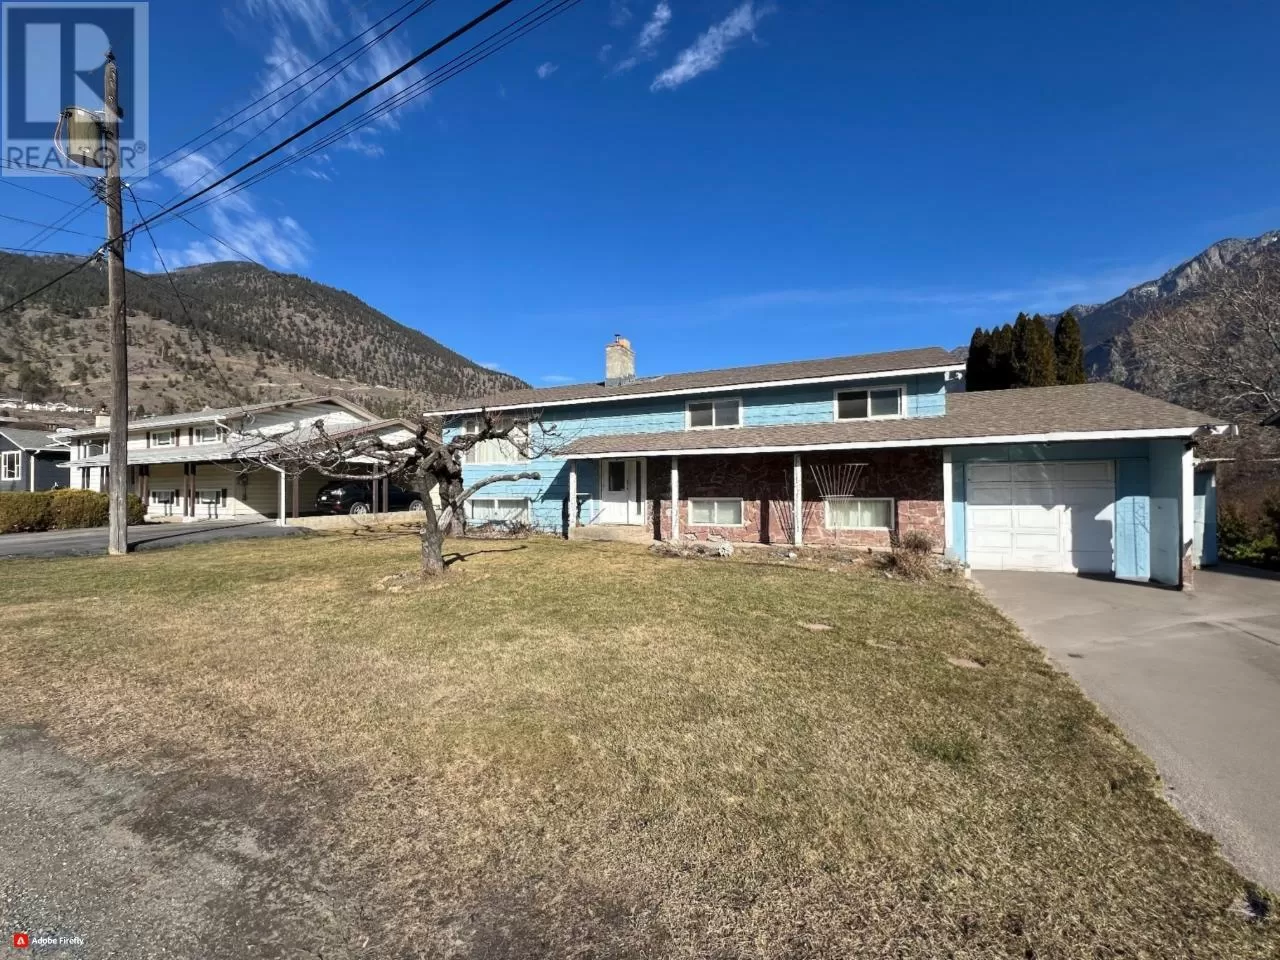 House for rent: 772 Orchard Drive, Lillooet, British Columbia